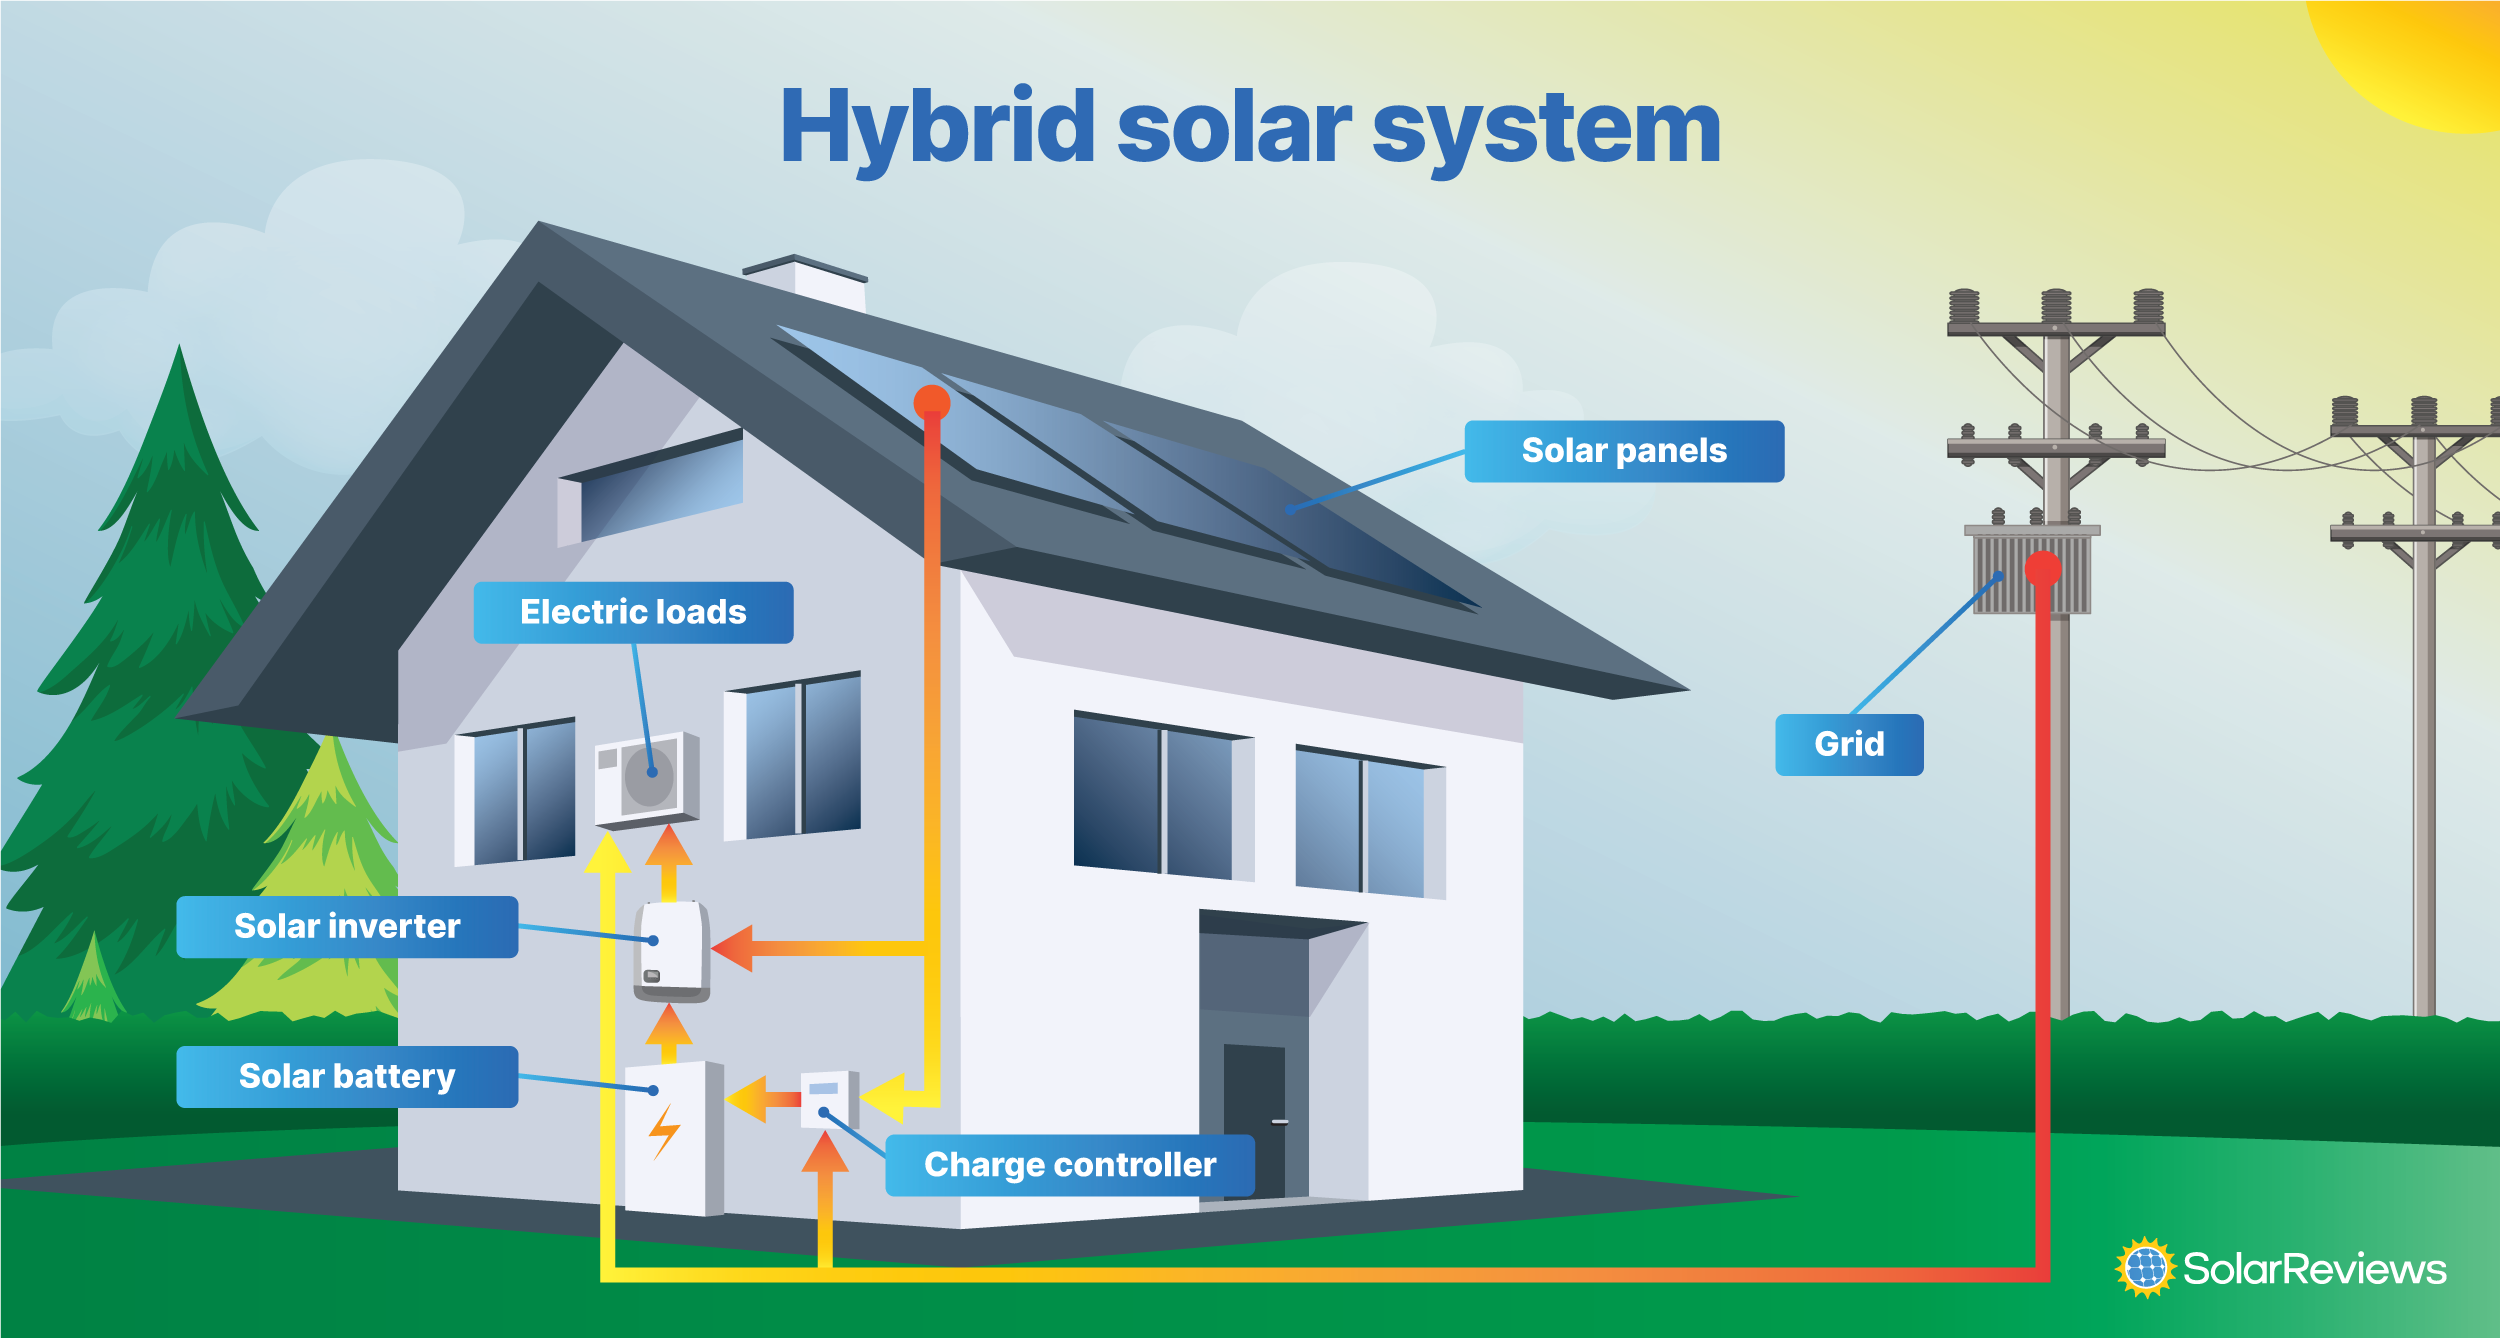 A home with a hybrid solar plus storage system. Electricity flows from the solar panels to the inverter to power the home. Extra solar energy is sent to the charge controller and battery, where the home can use it later. If the home needs more energy than the panels and batteries can provide, it is still connected to the grid.